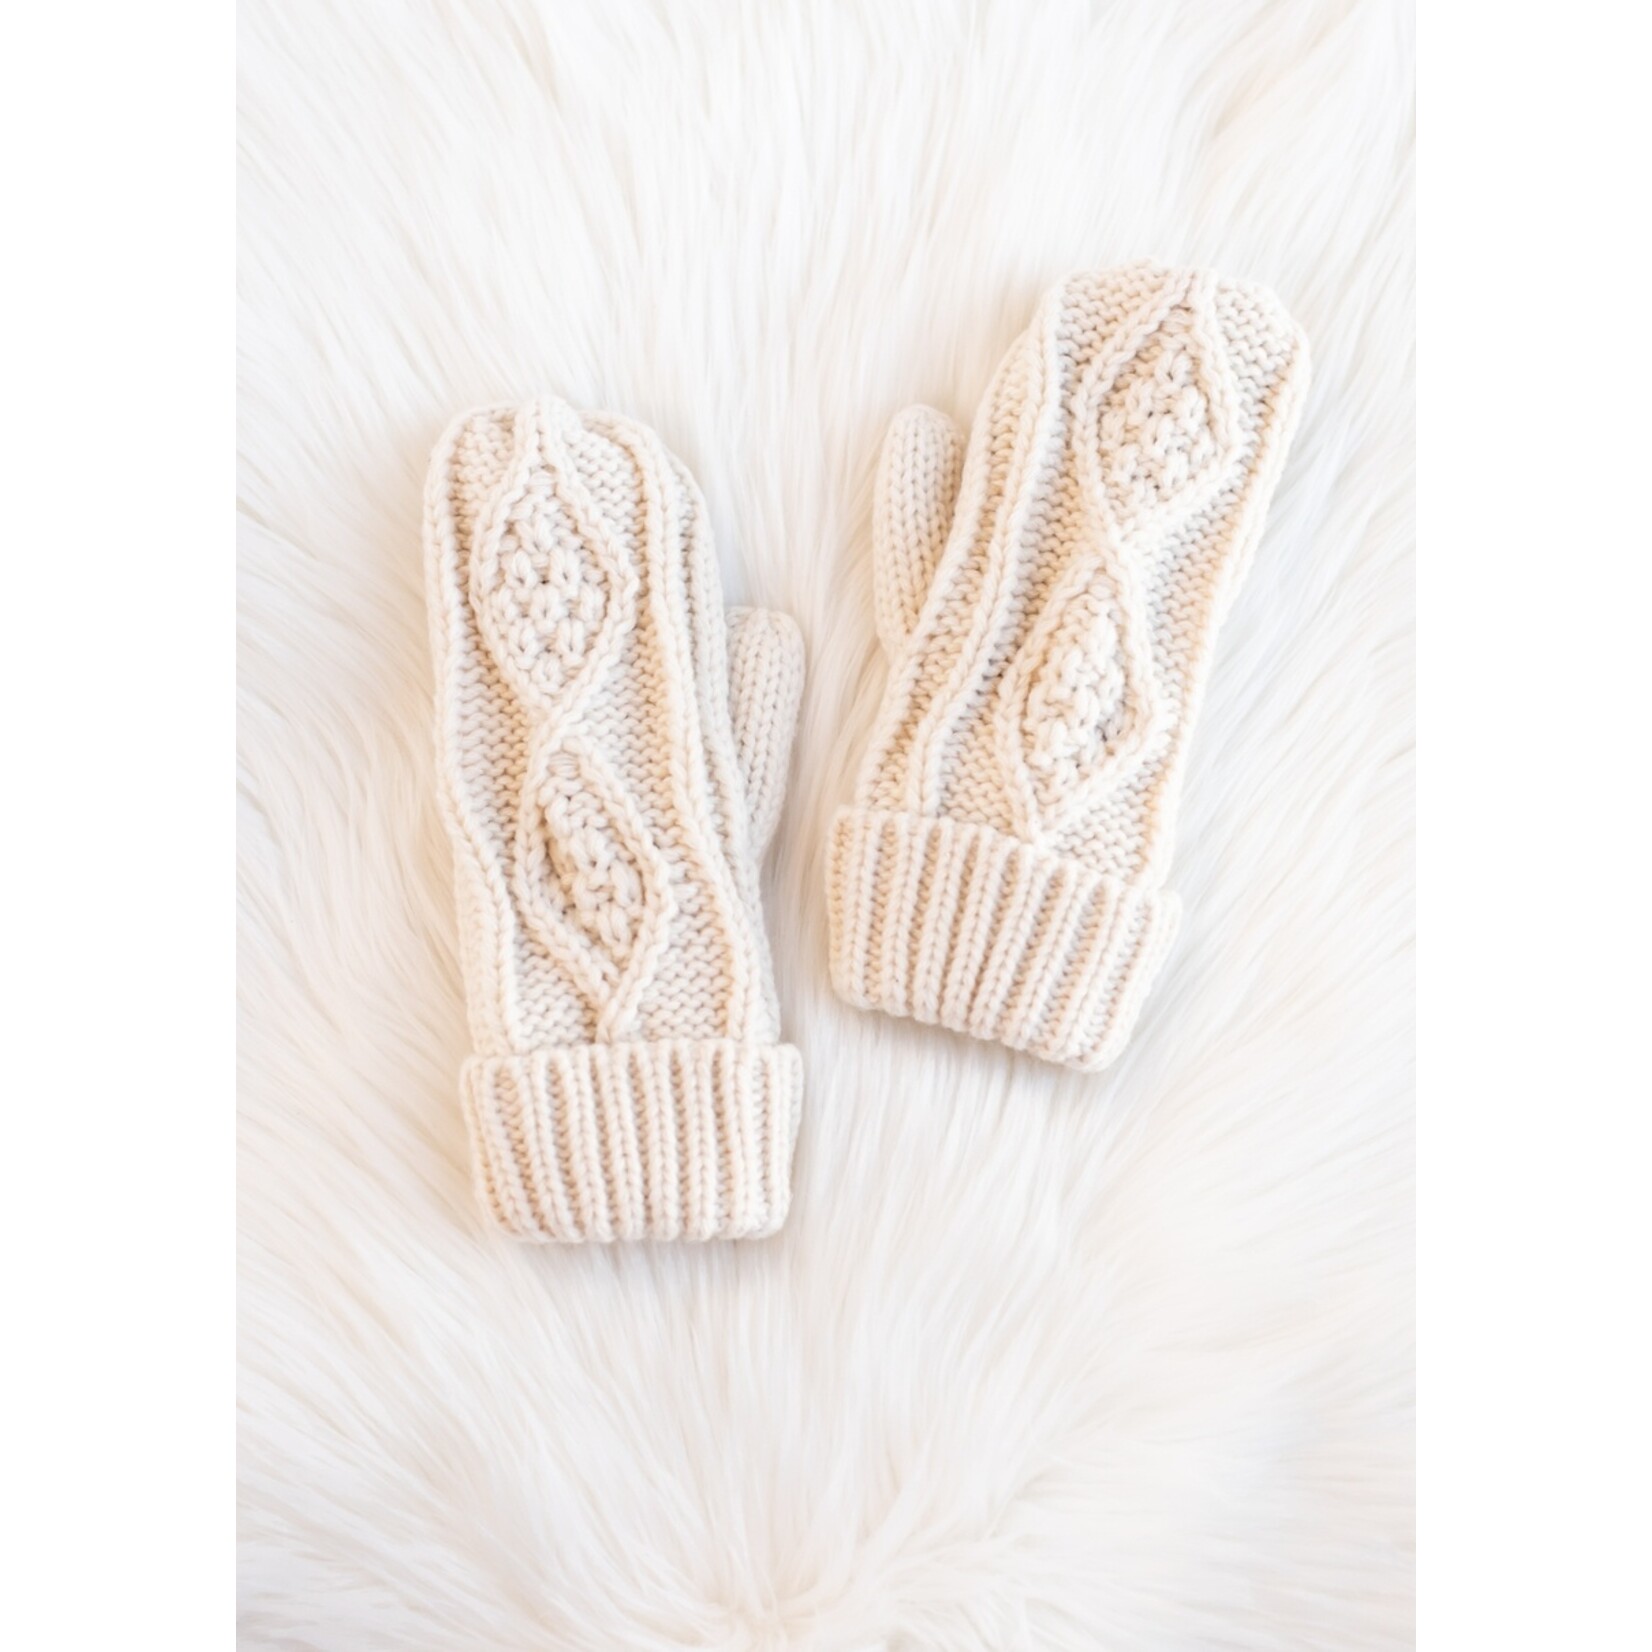 Panache Apparel Co. Beige Cable Knit Mittens